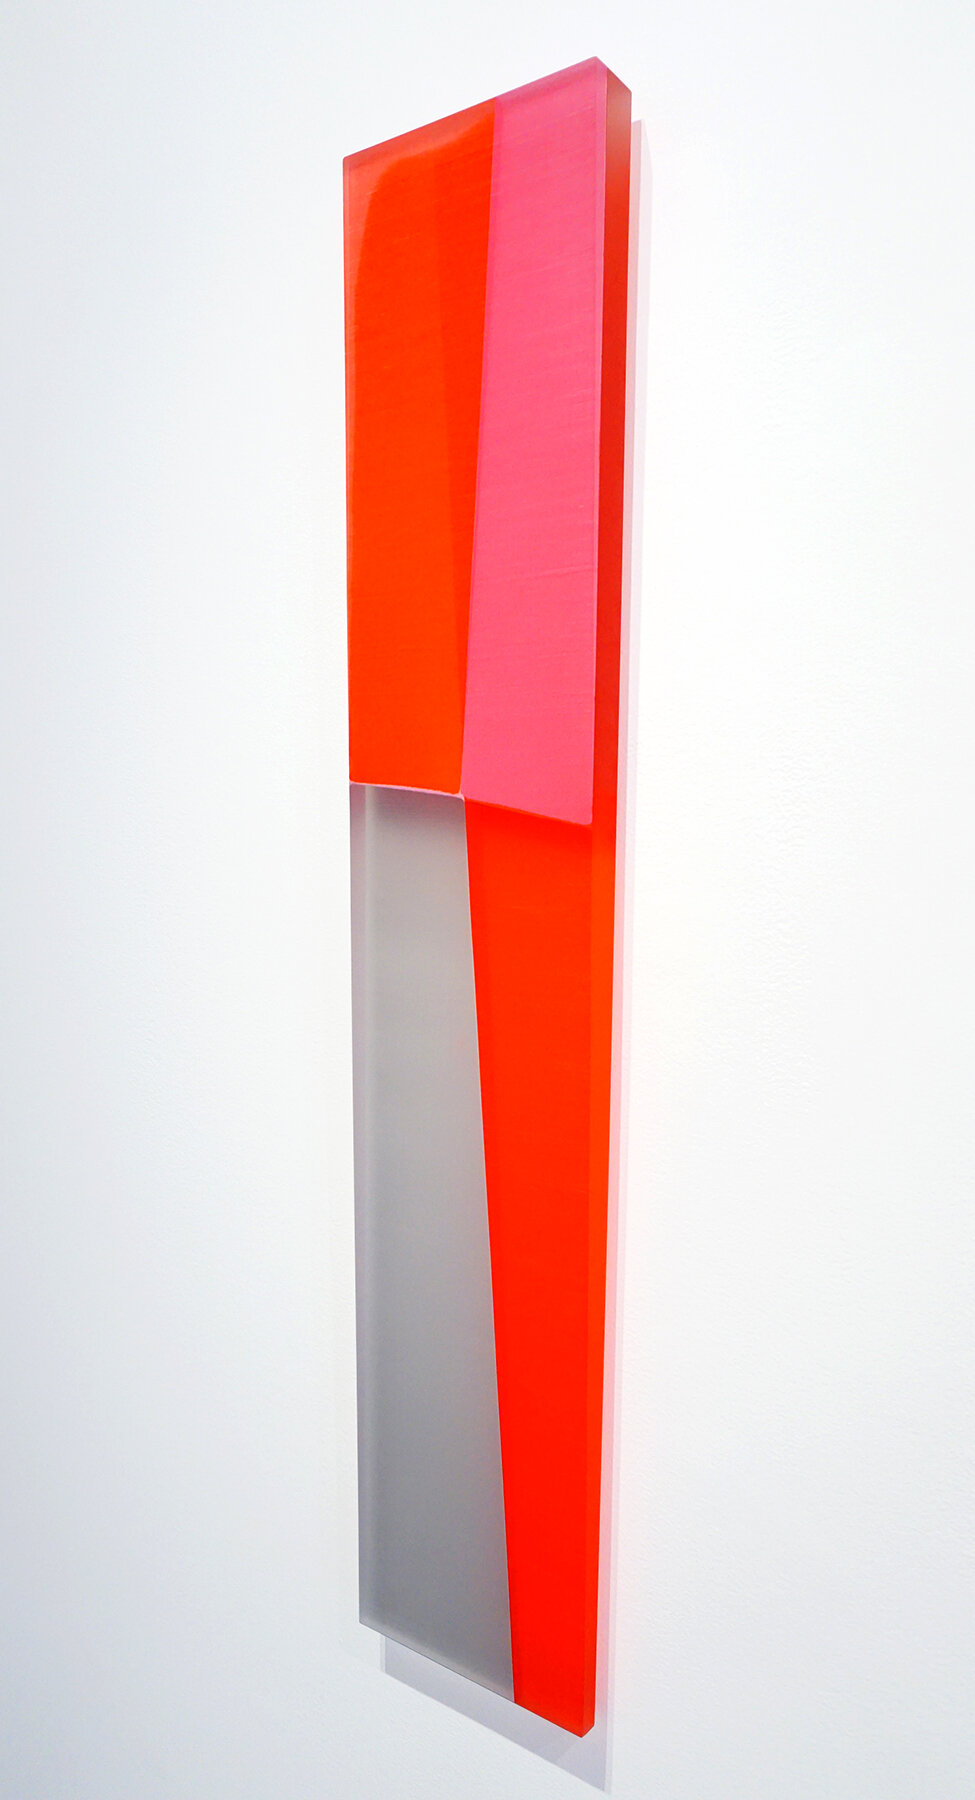 Oblique Weave, Orange (side view), 43 x 8 inches / 109.2 x 20.3 cm, mixed media on hand cut Lucite, 2019